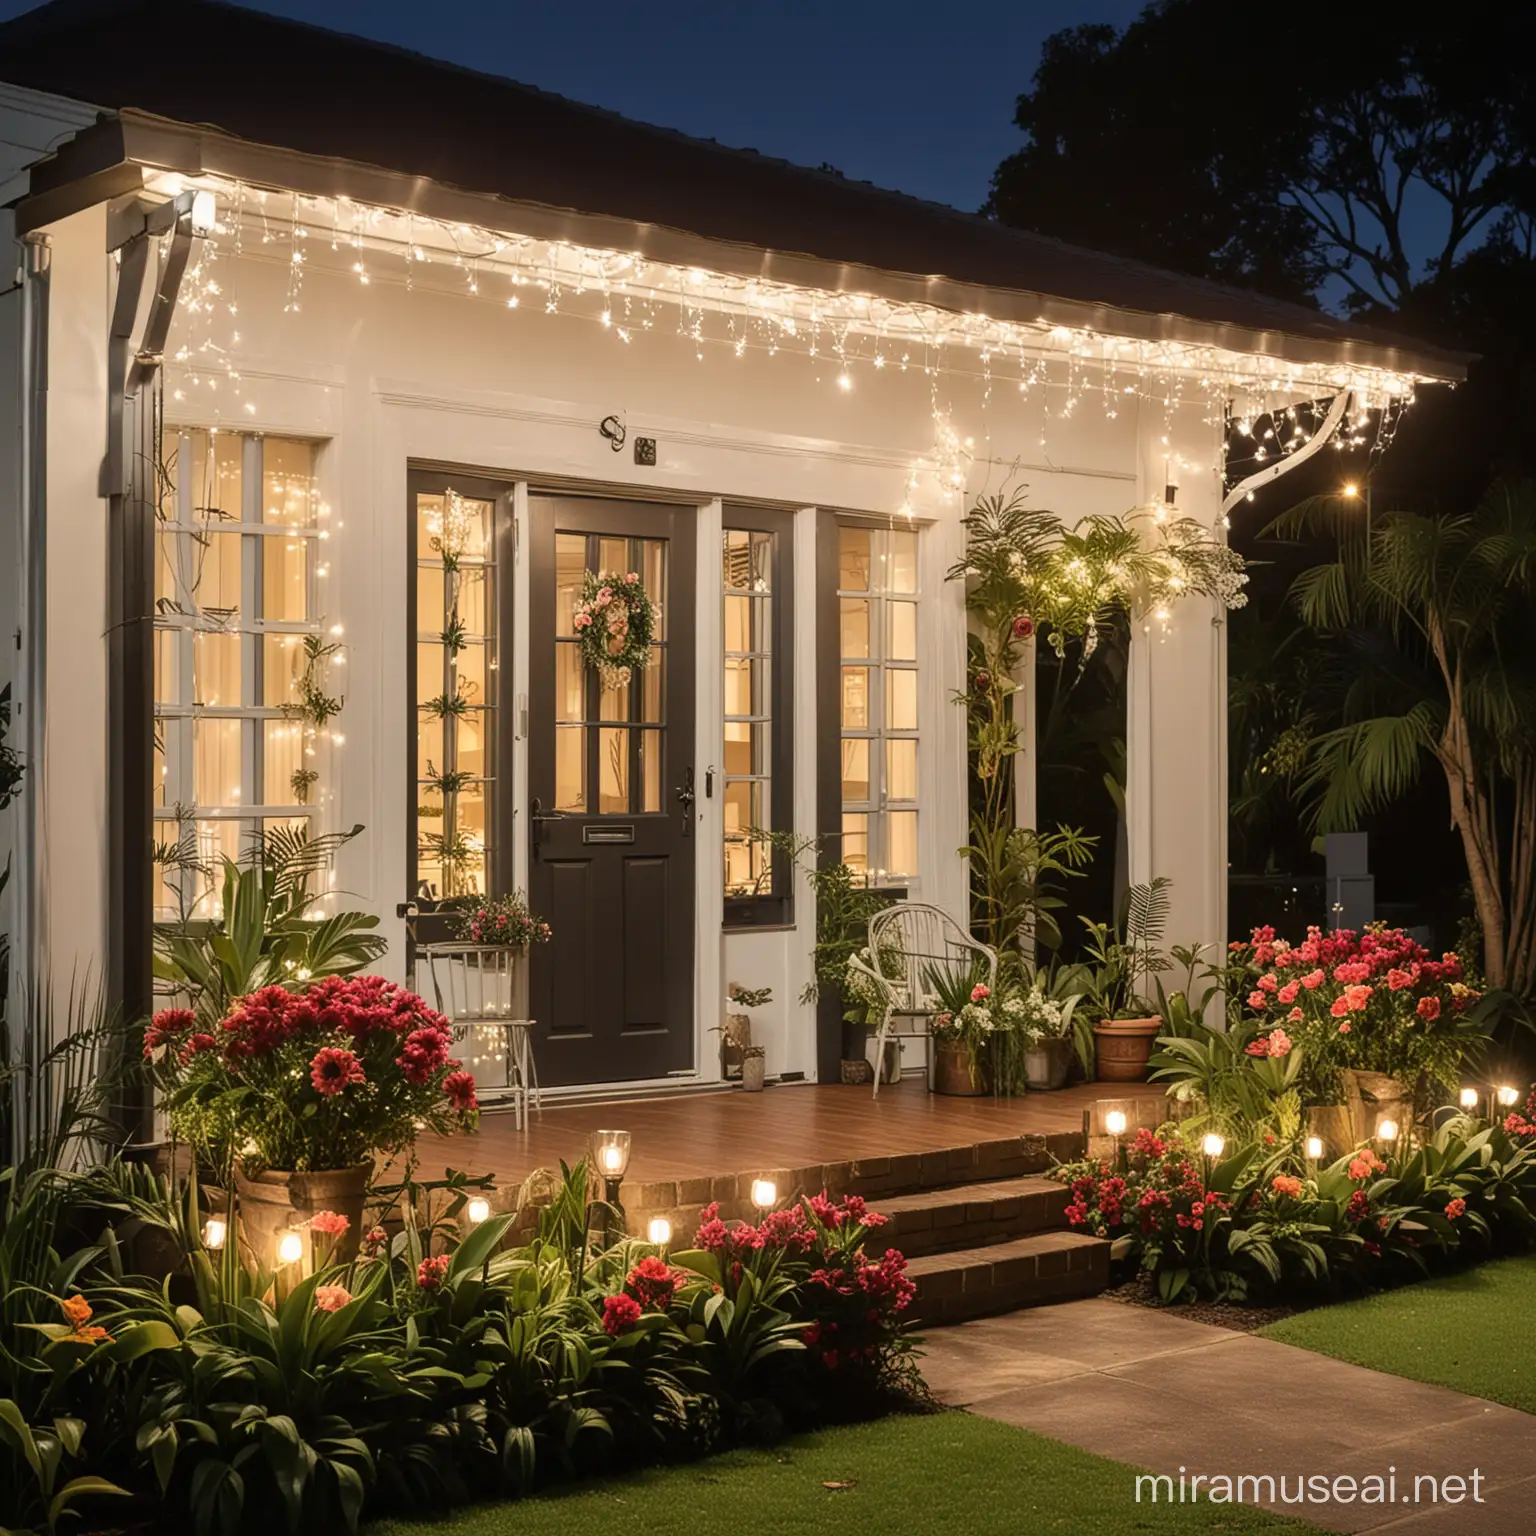 a beautiful bangalow decorated with lights and flowers